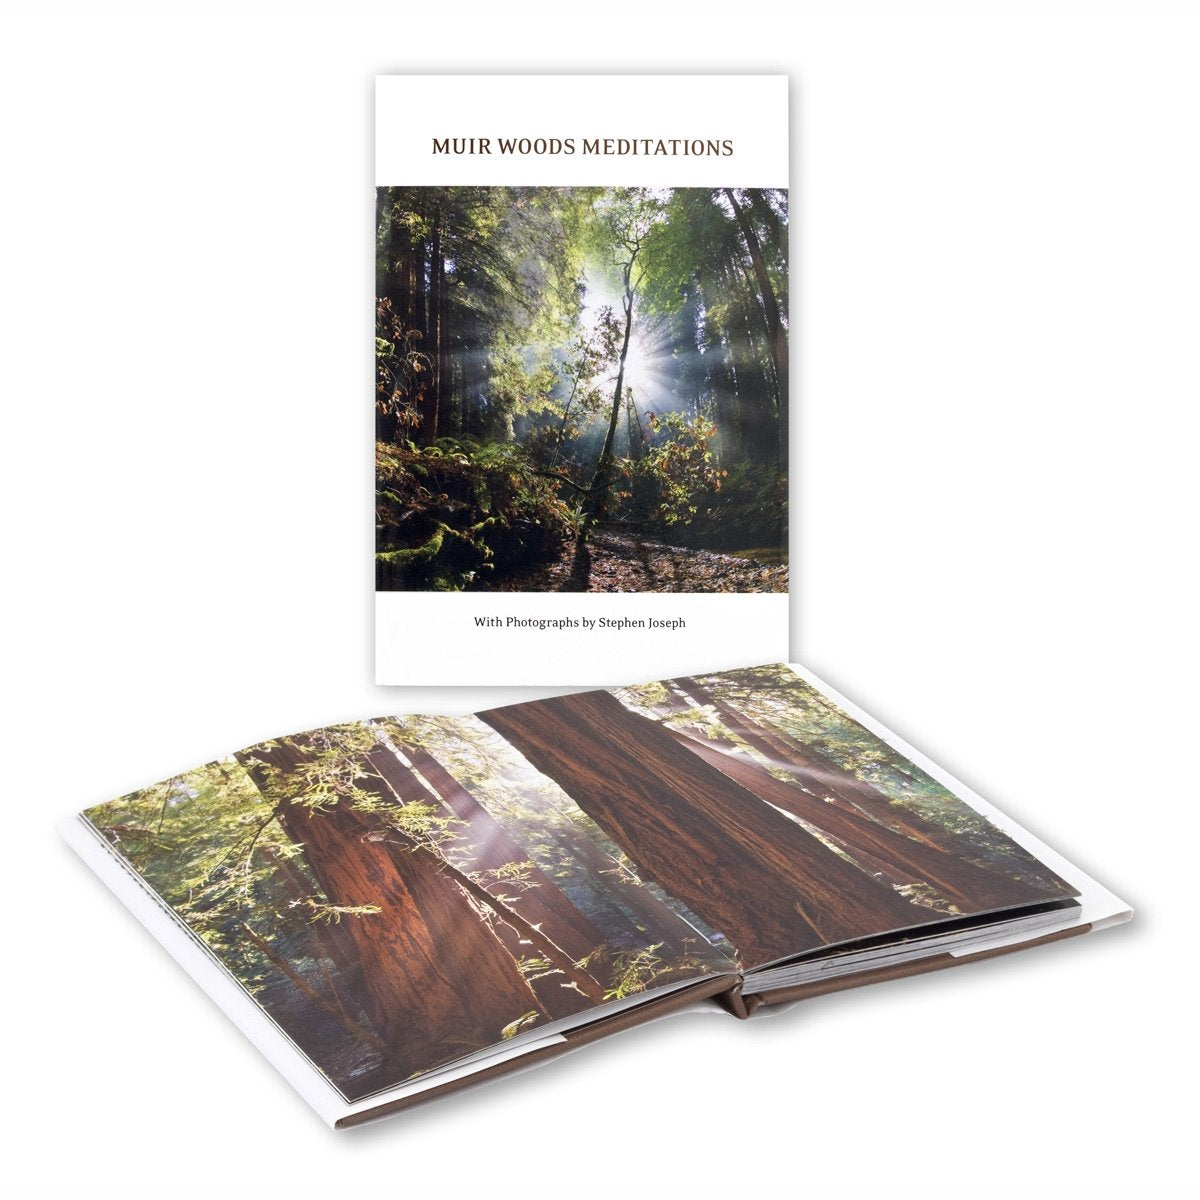 Muir Woods Meditations book, featuring full-color photographs of California's redwood forests.